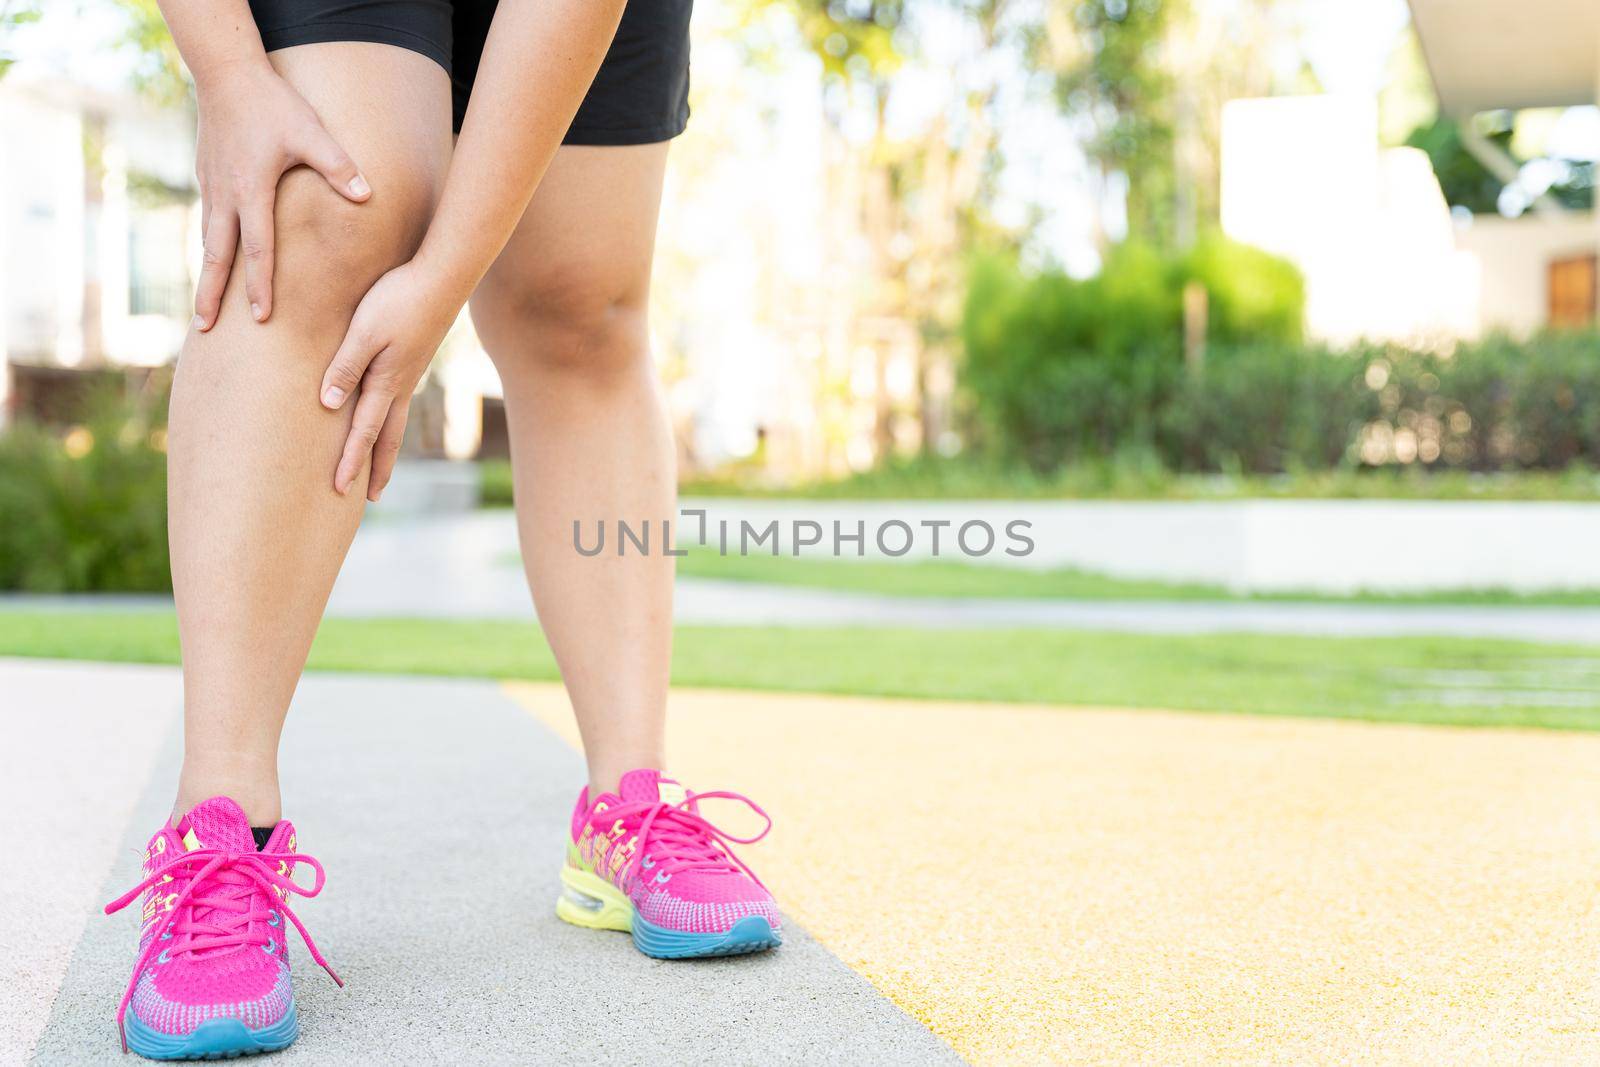 Female fatty runner athlete leg injury and pain. Hands grab painful knee while running in the park.